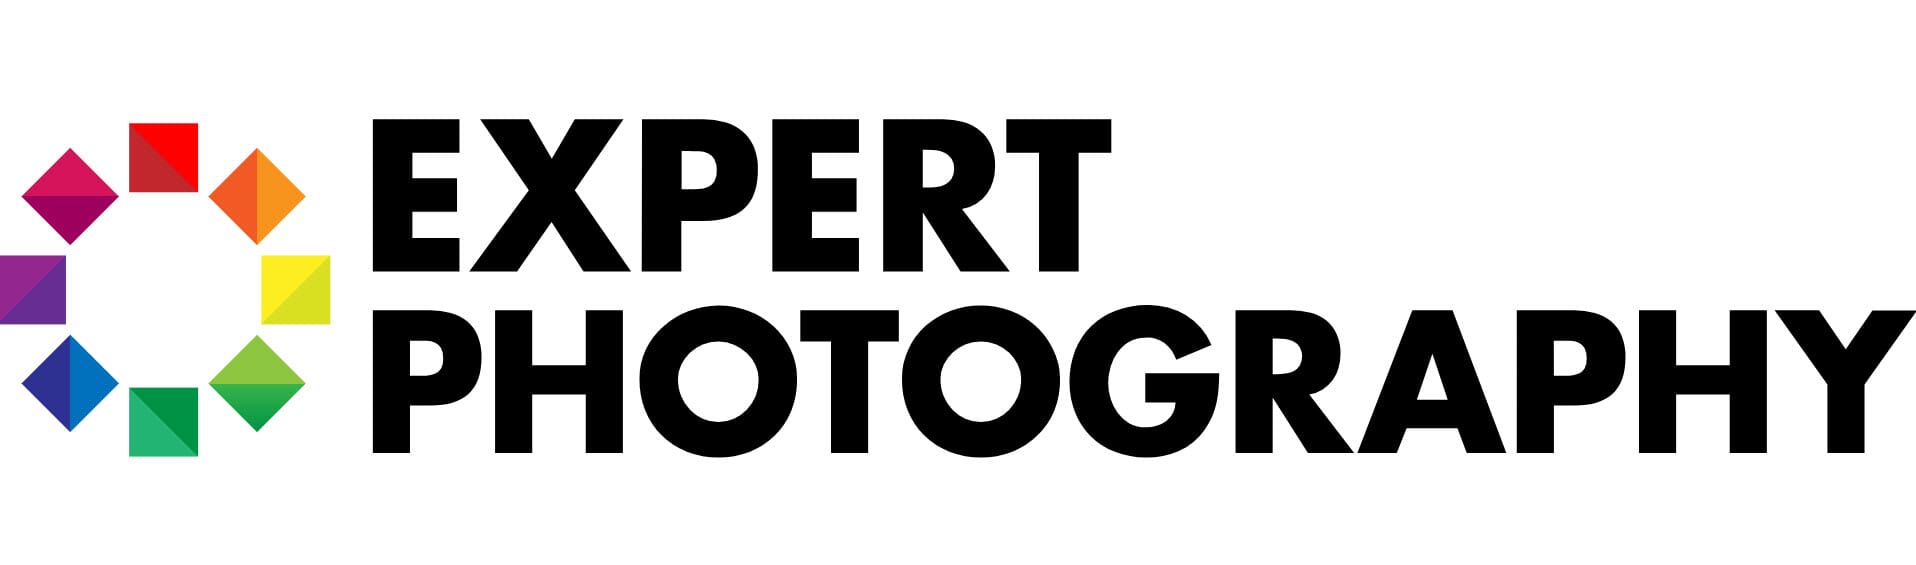 Expert Photography Courses and eBooks